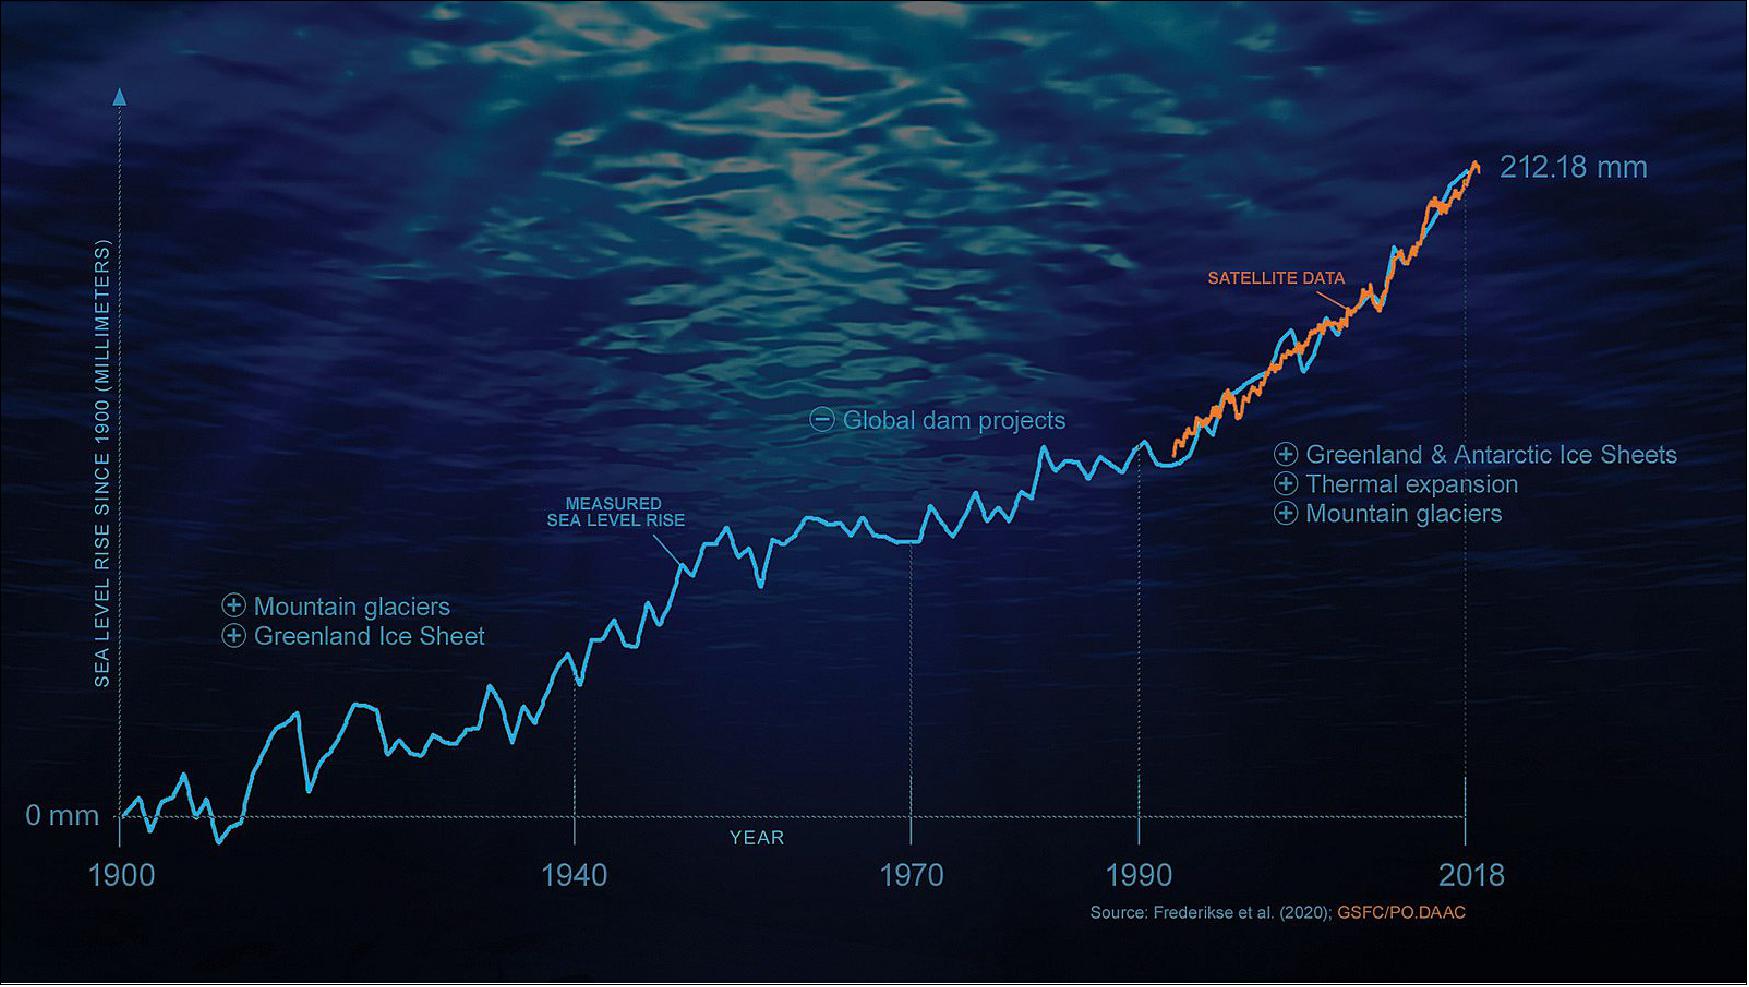 Figure 73: This infographic shows the rise in sea levels since 1900. Pre-1940, glaciers and Greenland meltwater dominated the rise; dam projects slowed the rise in the 1970s. Now, ice sheet and glacier melt, plus thermal expansion, dominate the rise. Tide-gauge data shown in blue and satellite data in orange (image credit: NASA/JPL-Caltech)